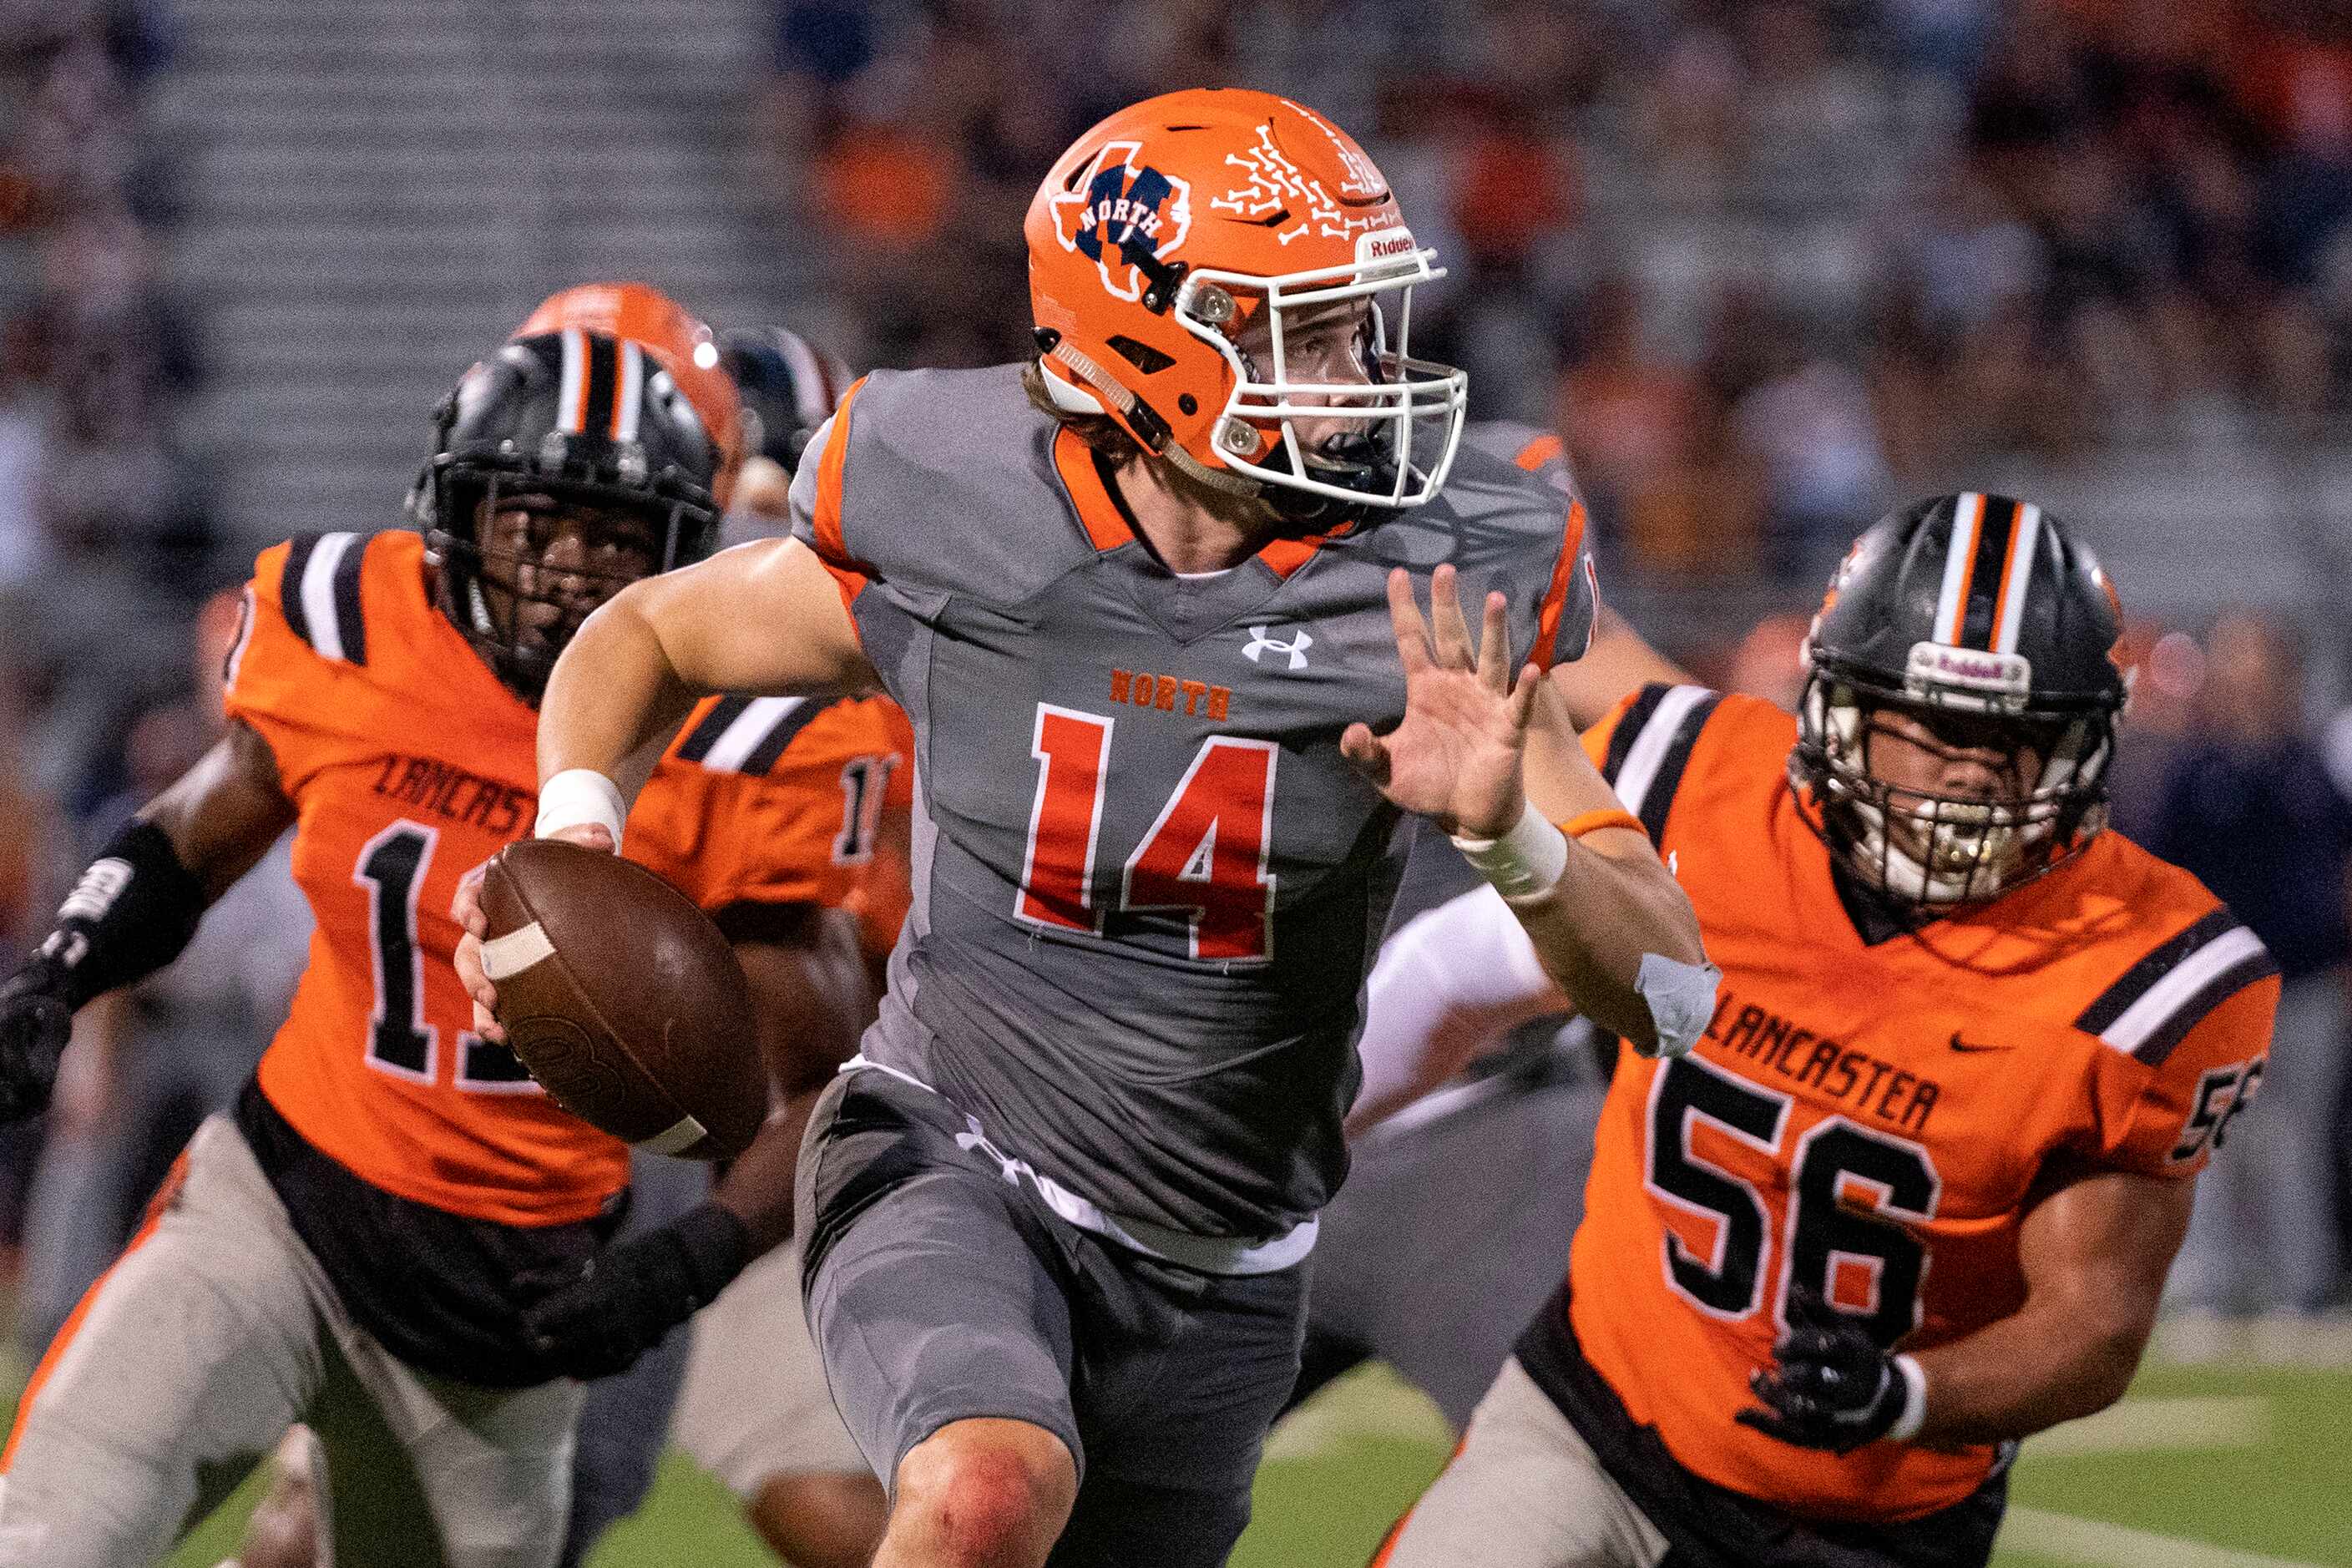 McKinney North junior quarterback Colin Hitchcock (14) rolls out to pass as he is pursued by...